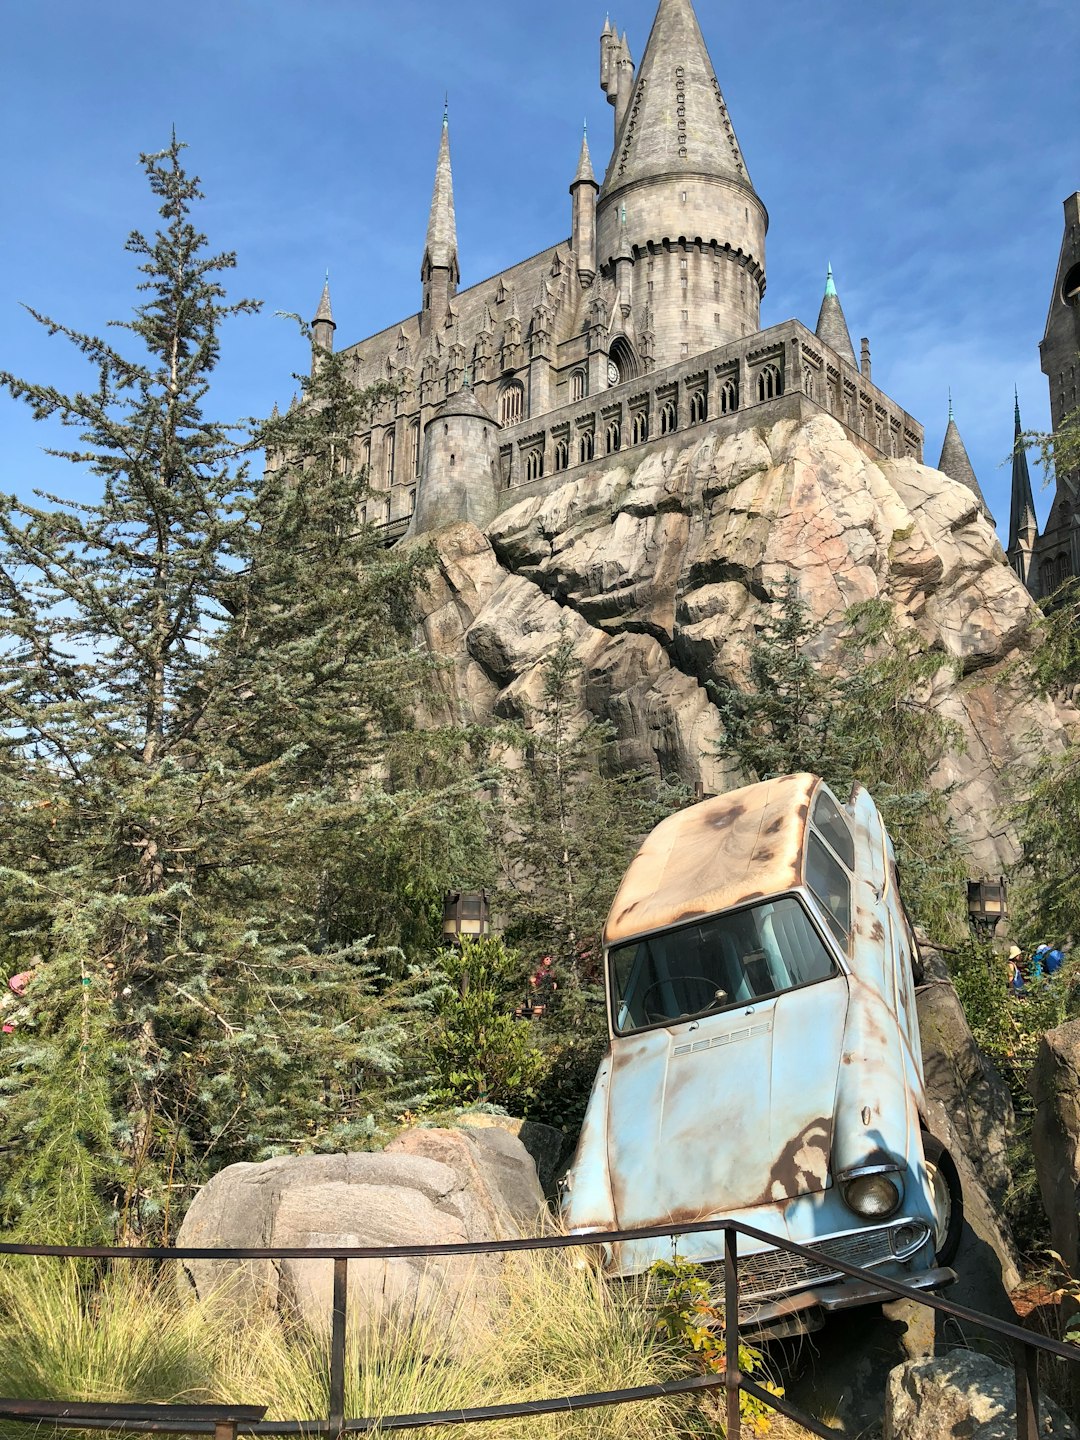 Historic site photo spot The Wizarding World of Harry Potter United States